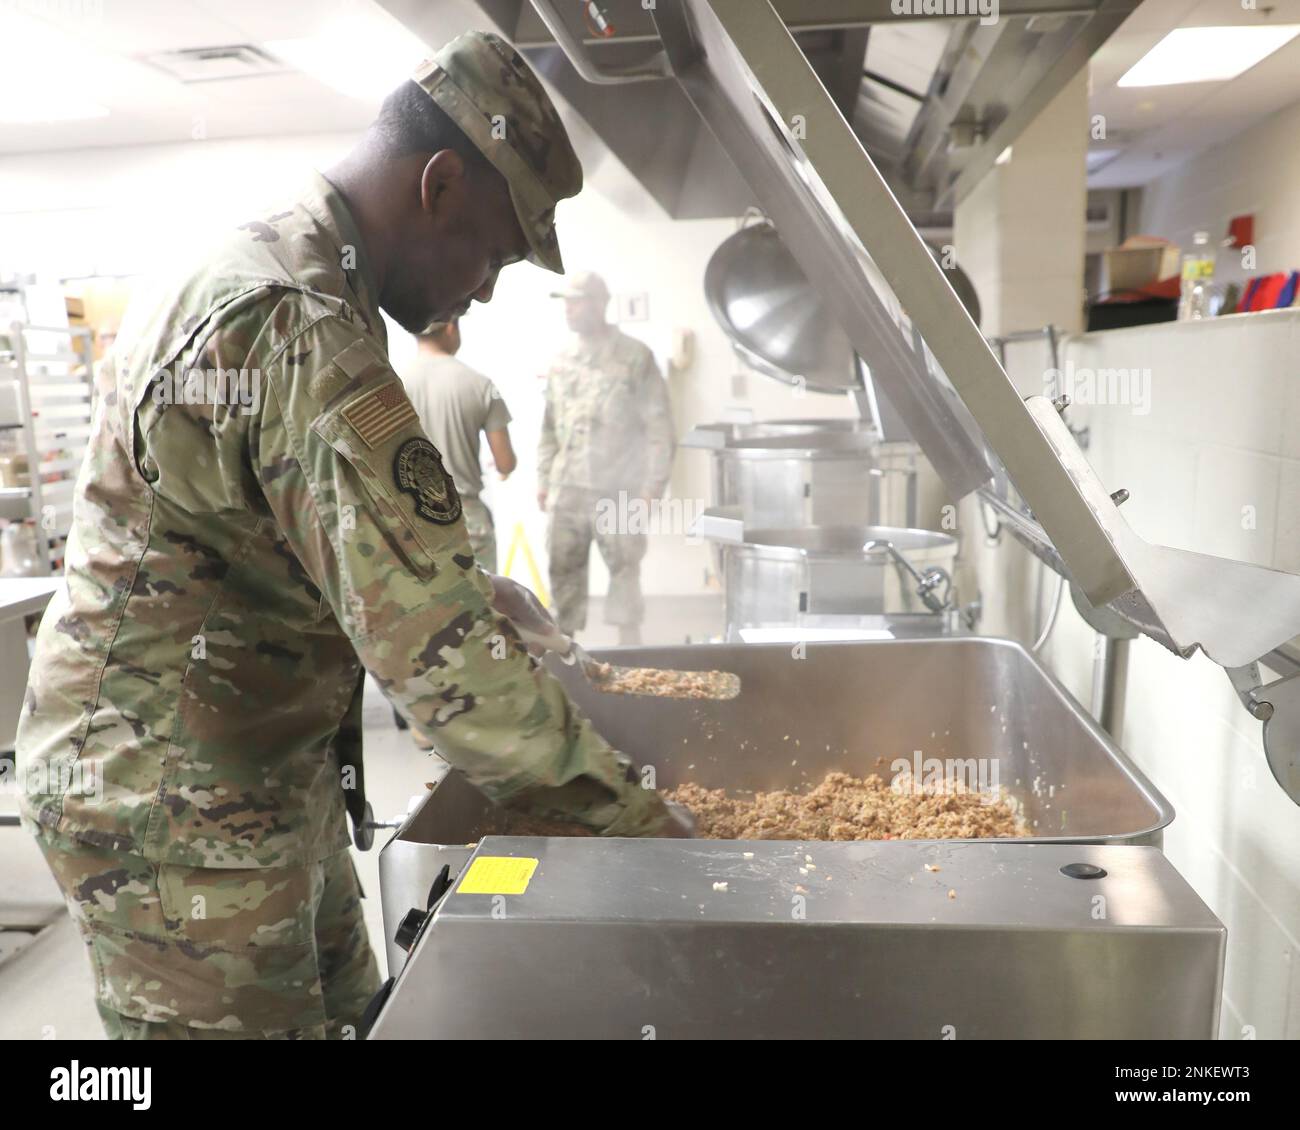 Steam rises from a cooking surface as Senior Airman Nathaniel McKinstry works on meal preparation at Selfridge Air National Guard Base, Michigan, Aug. 14, 2022. McKinstry has been a member of the 127th Force Support Squadron at Selfridge for about three years. The squadron’s Services Flight provides meals, lodging, fitness and other support services to the 1,700 Citizen-Airmen of the 127th Wing at Selfridge. Stock Photo